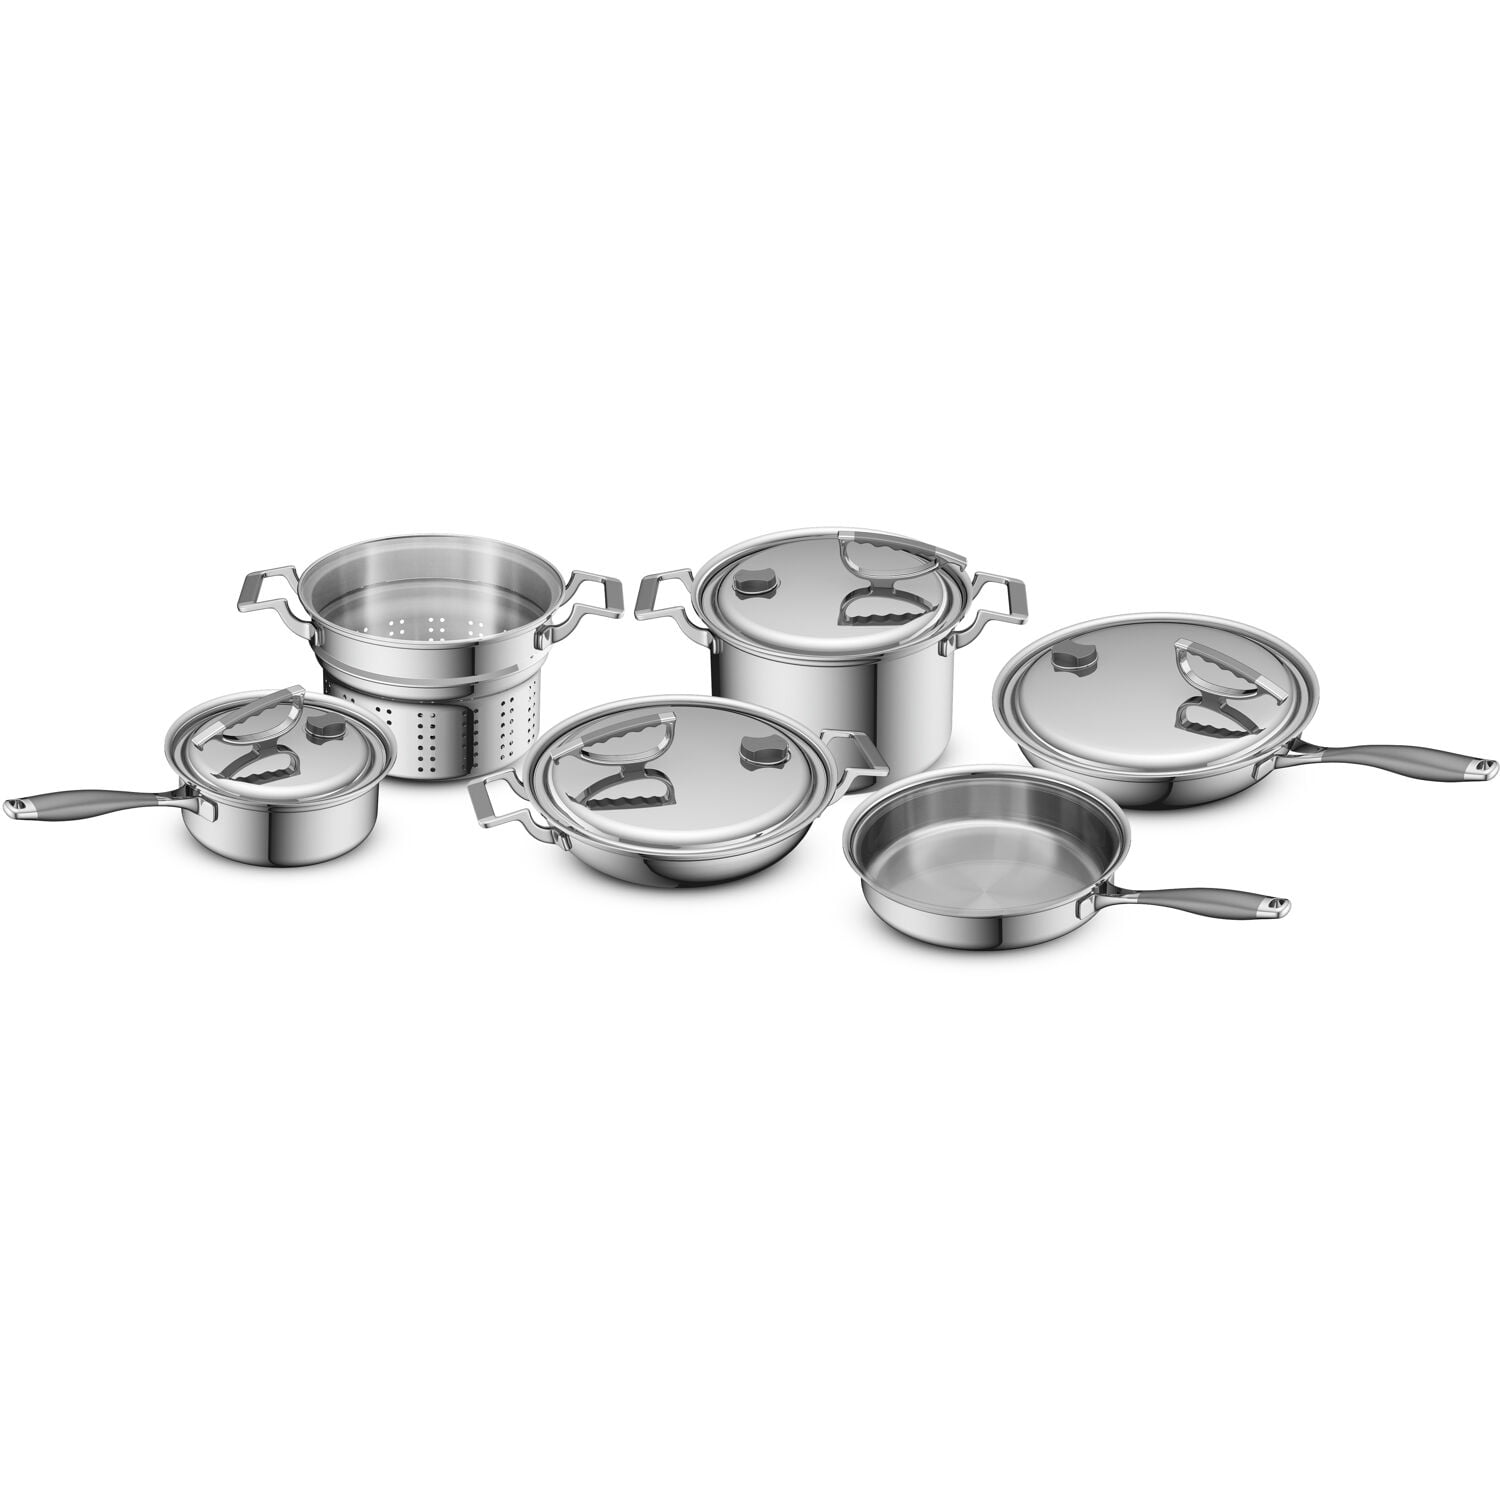 Health Craft 5-Ply Surgical Steel 13 Pc Cookware Set Pots Pans